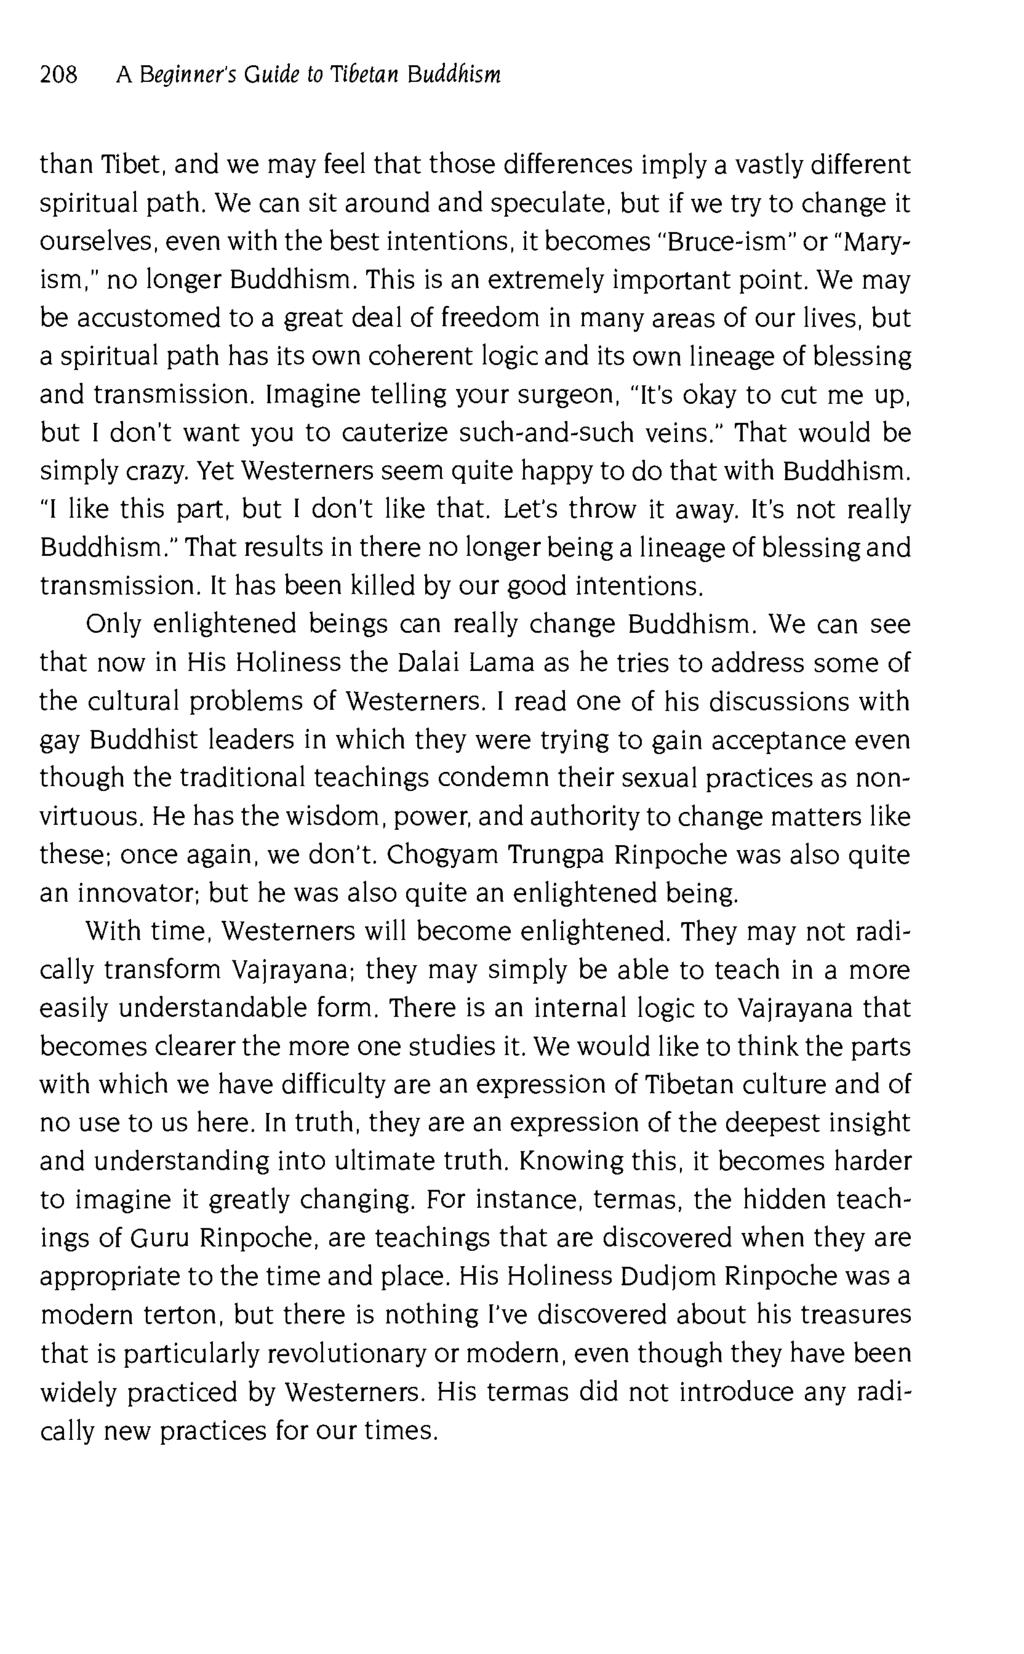 208 A Beginner's Guide to Tibetan Buddhism than Tibet, and we may feel that those differences imply a vastly different spiritual path.